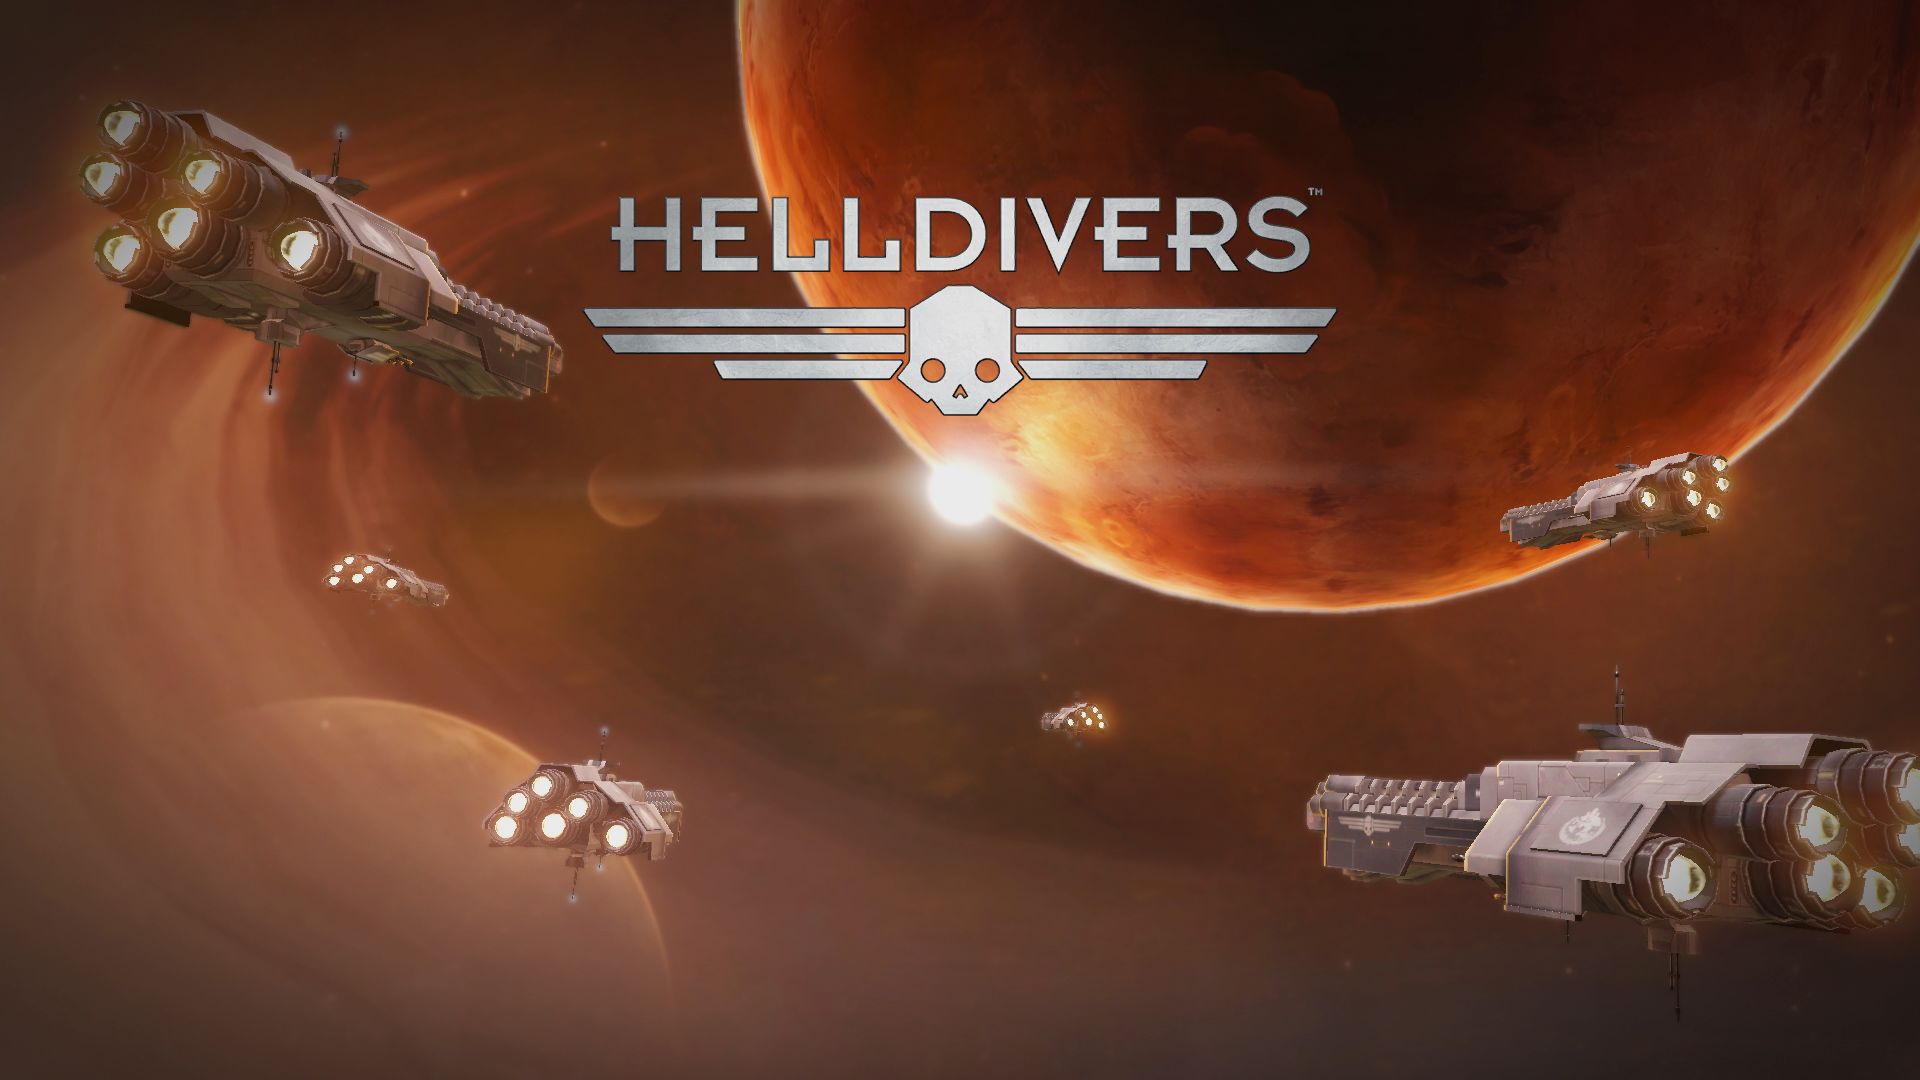 Cool Helldivers Backgrounds